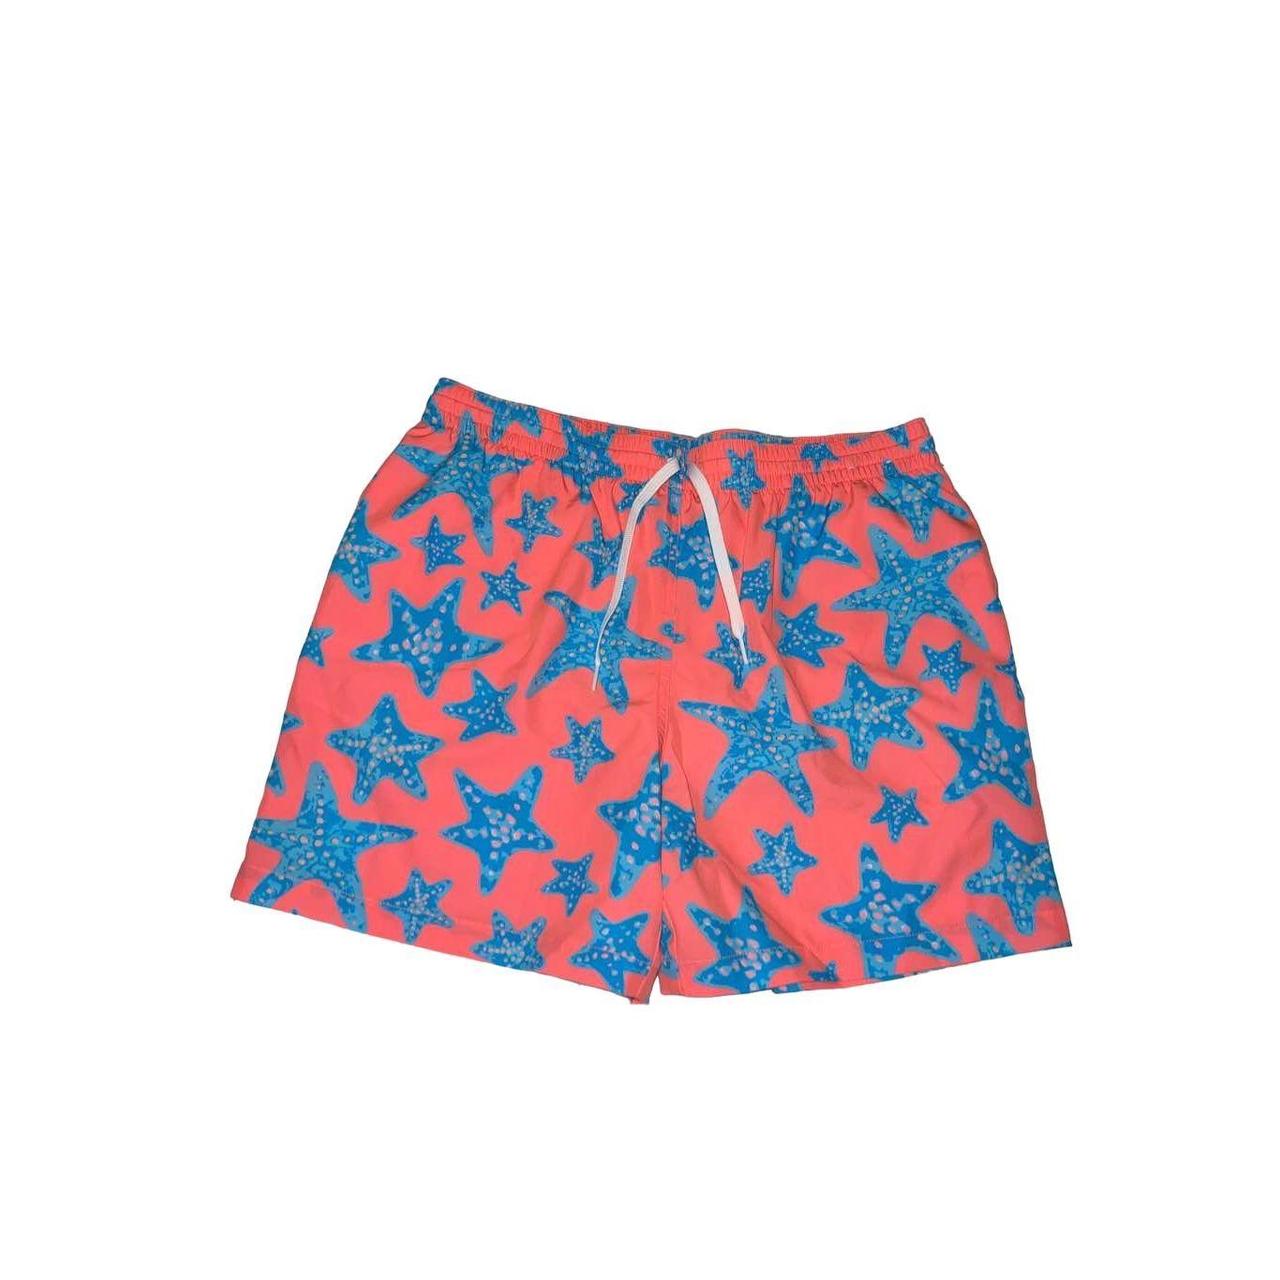 Chubbies Coral Starfish Discontinued Print 5.5 Inch... - Depop